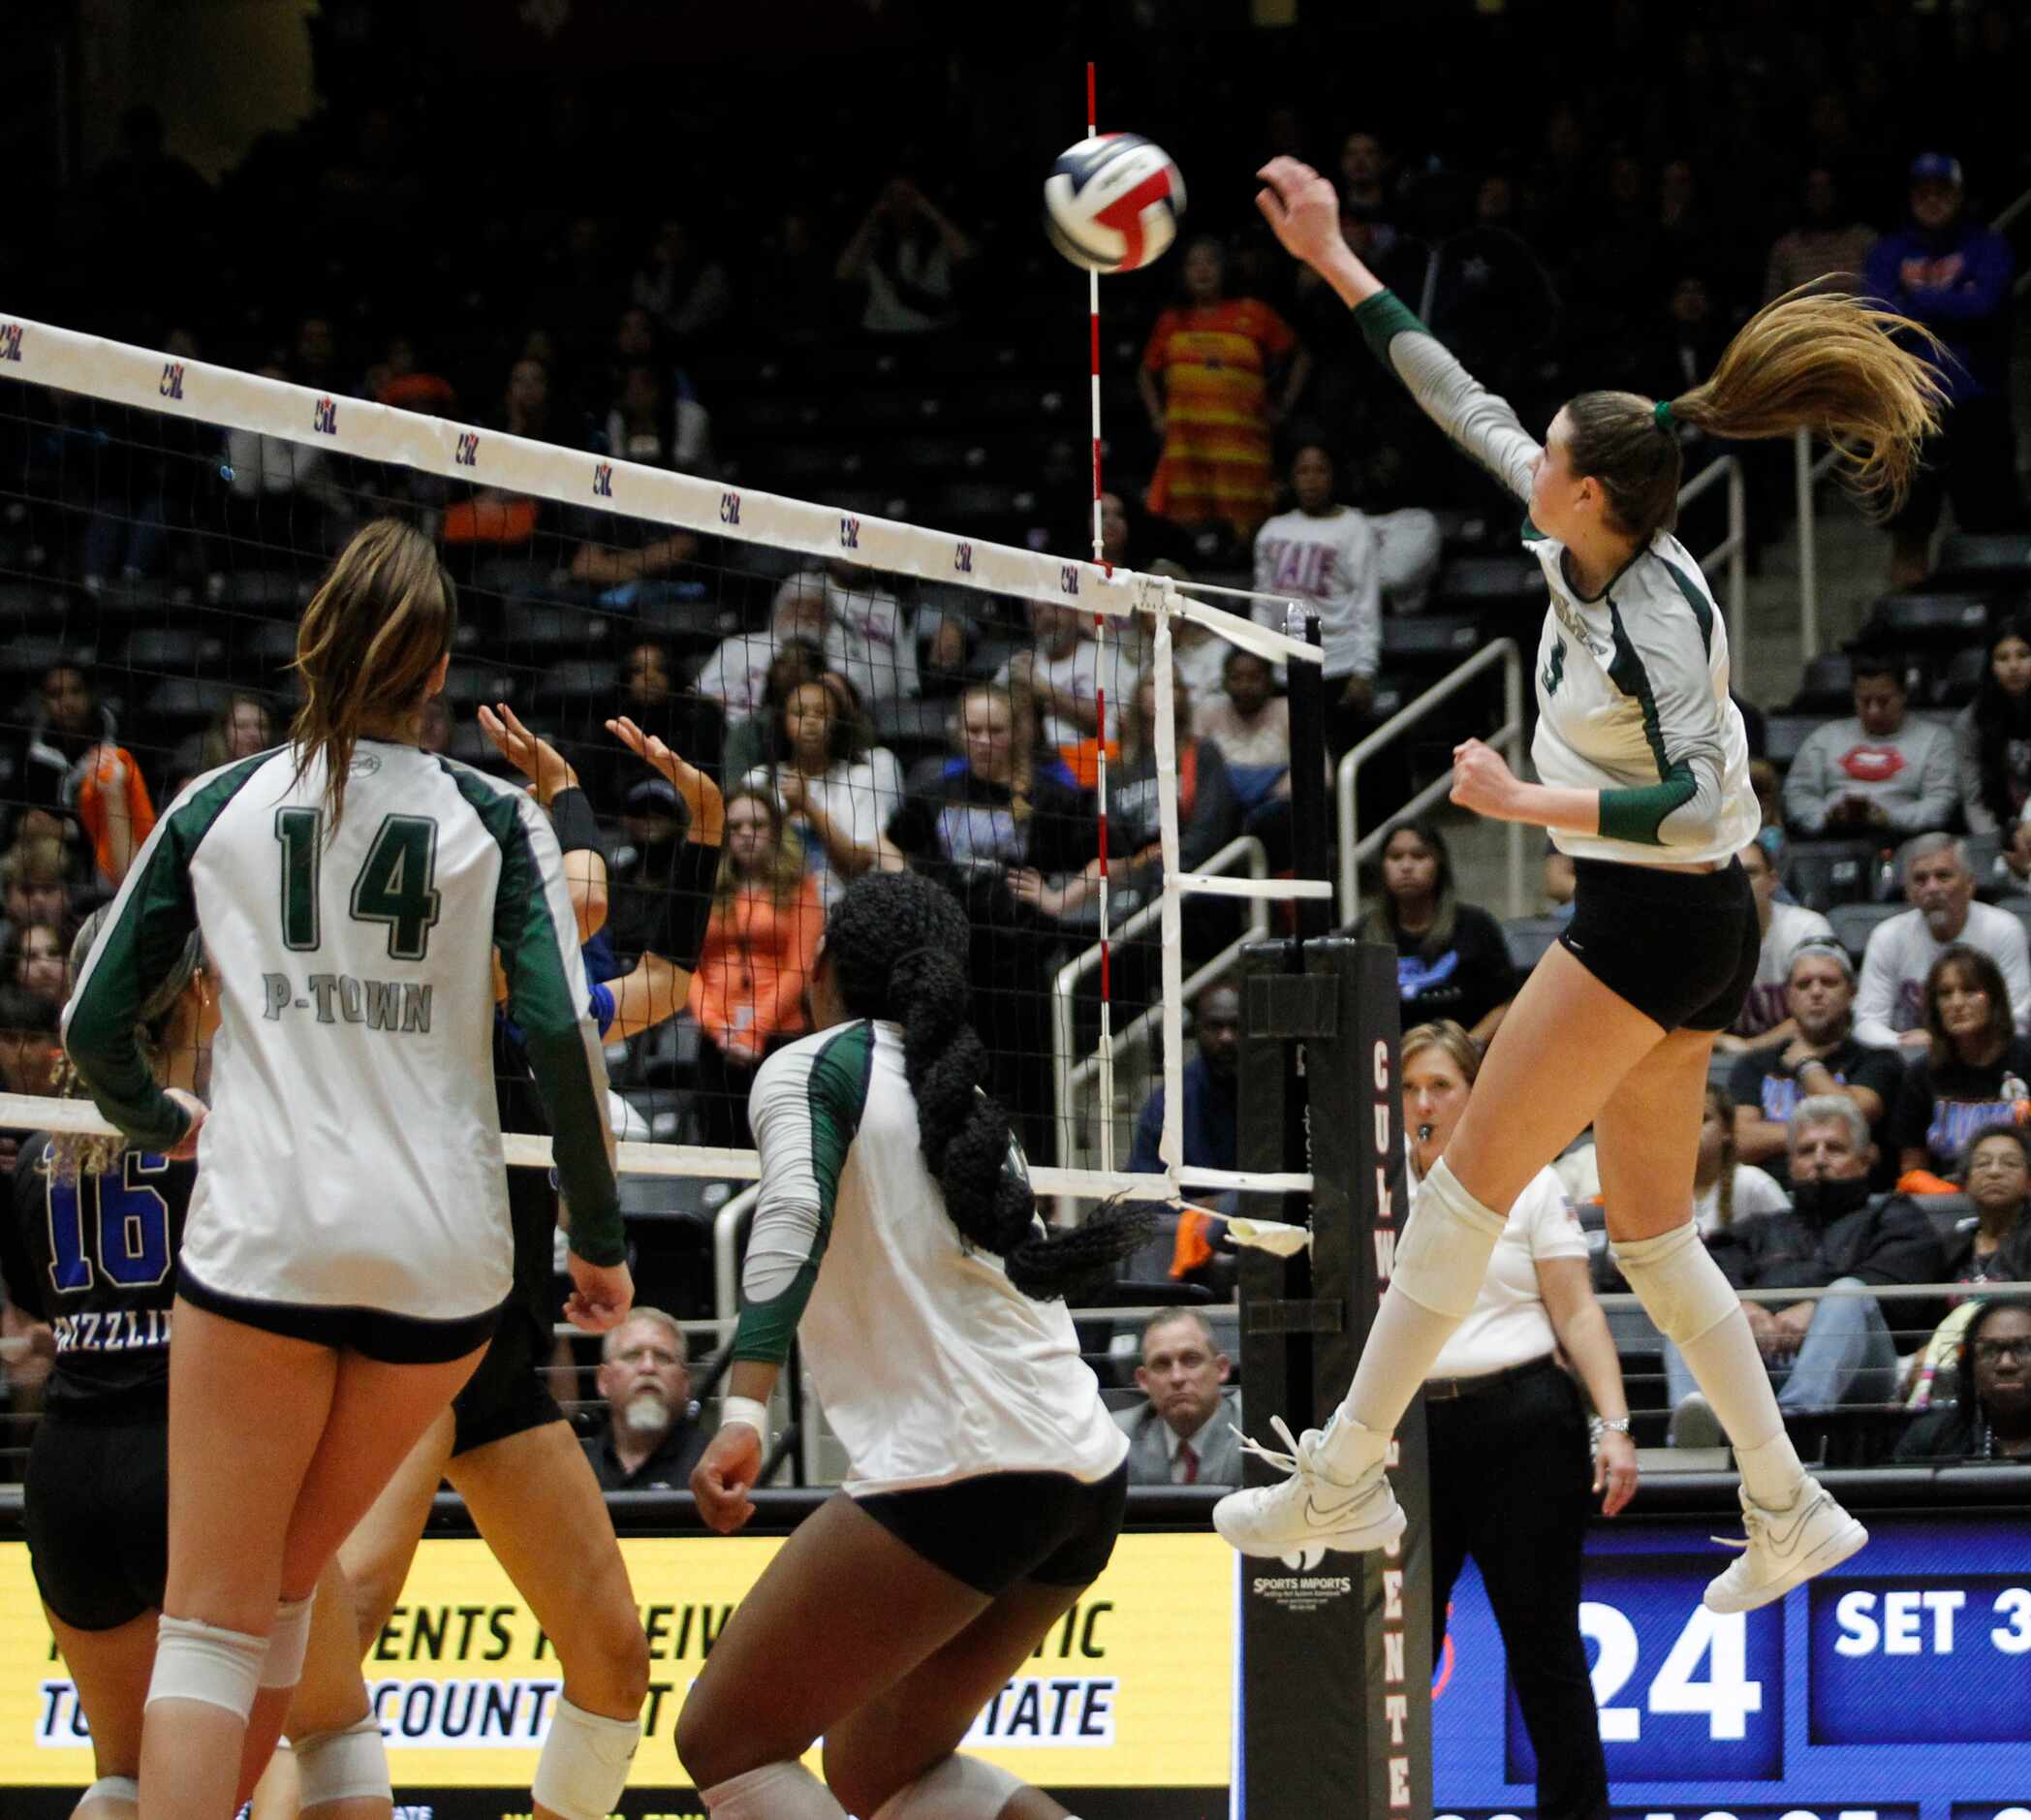 Prosper senior Ayden Ames (9), right, powers a spike for a score during the 3rd set of their...